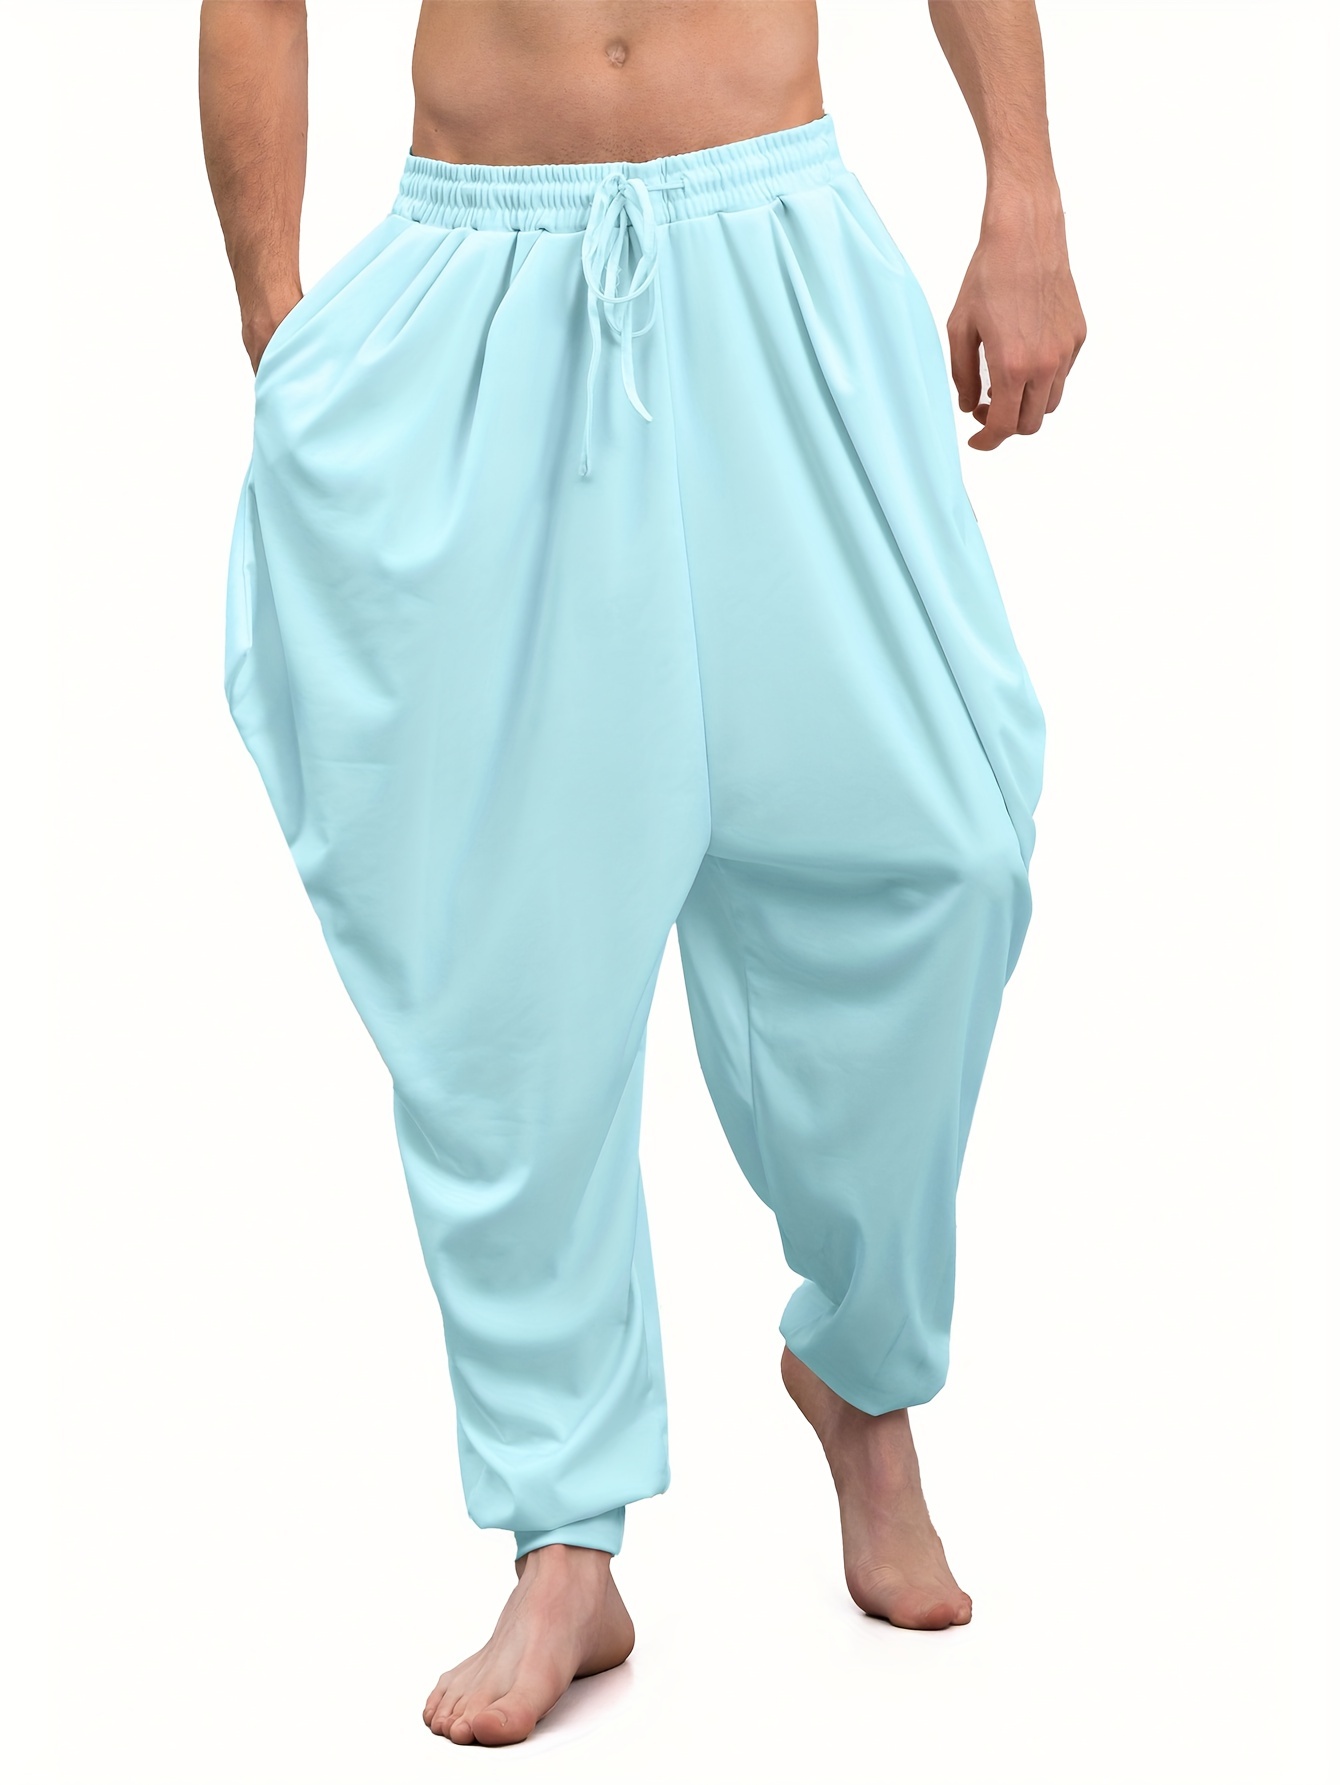 Harem Pants for Men Solid Elastic Waist Drawstring Wide Leg Pants Casual  Baggy Plus Size Stretchy Lounge Trousers